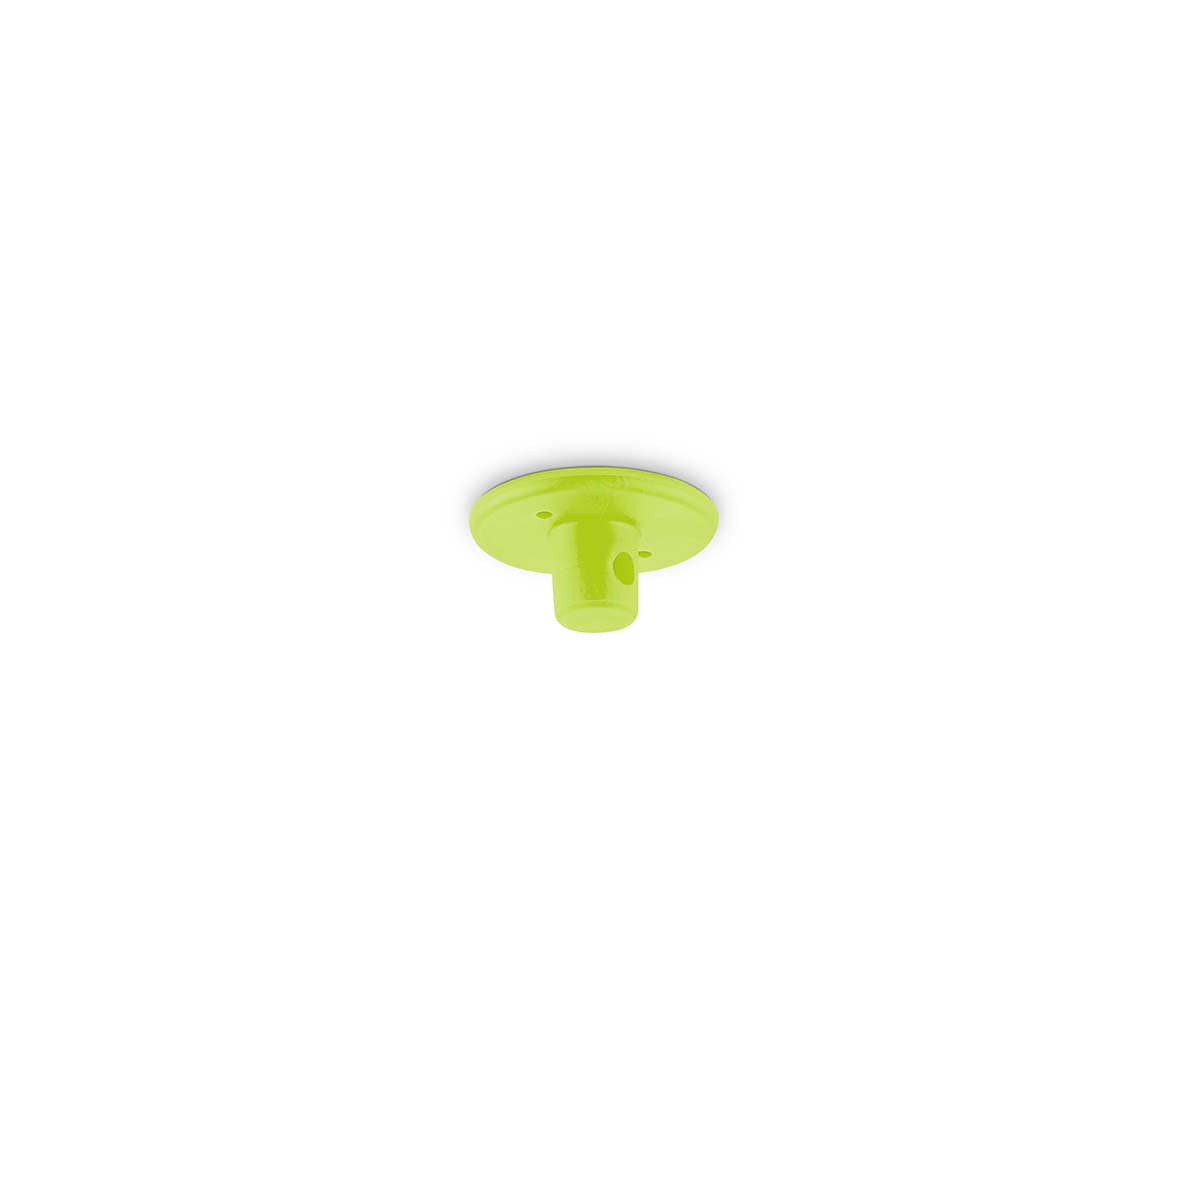 Tangla lighting - TLHG003FG - Silicone cable hanger - mix and match - fruit green